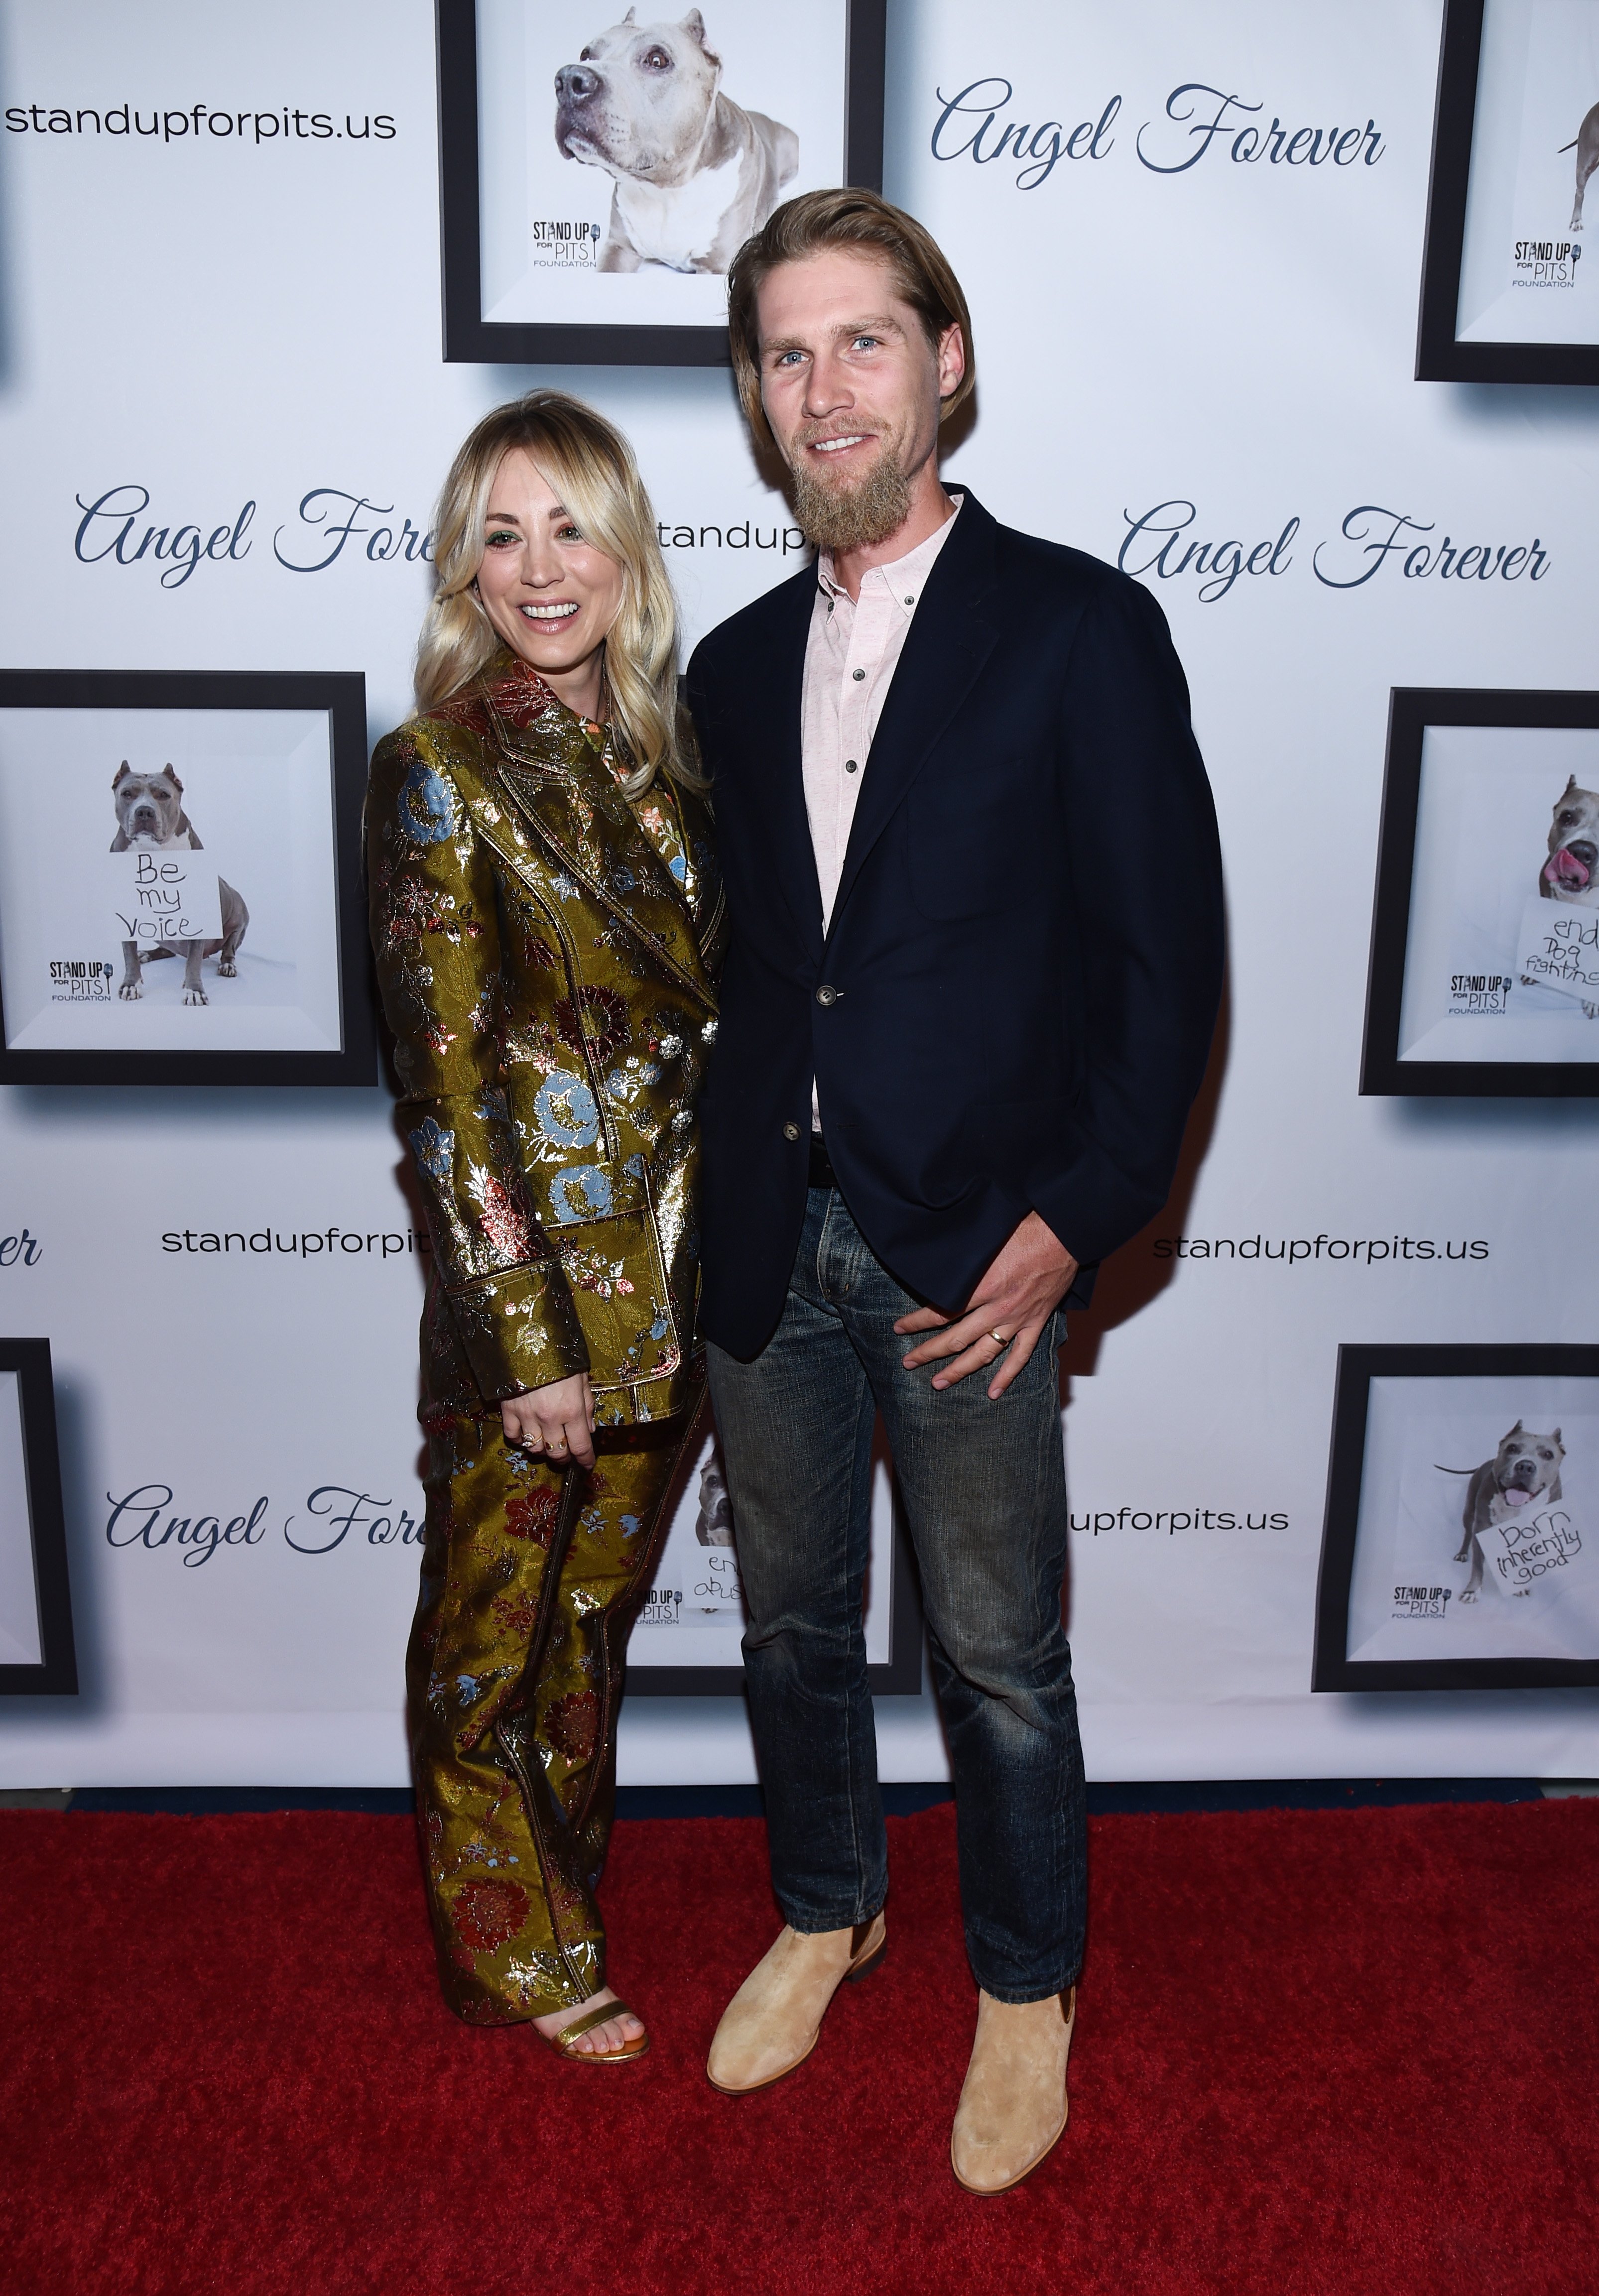 Kaley Cuoco and Karl Cook at the 9th Annual Stand Up For Pits event on November 3, 2019, in Los Angeles, California | Source: Getty Images